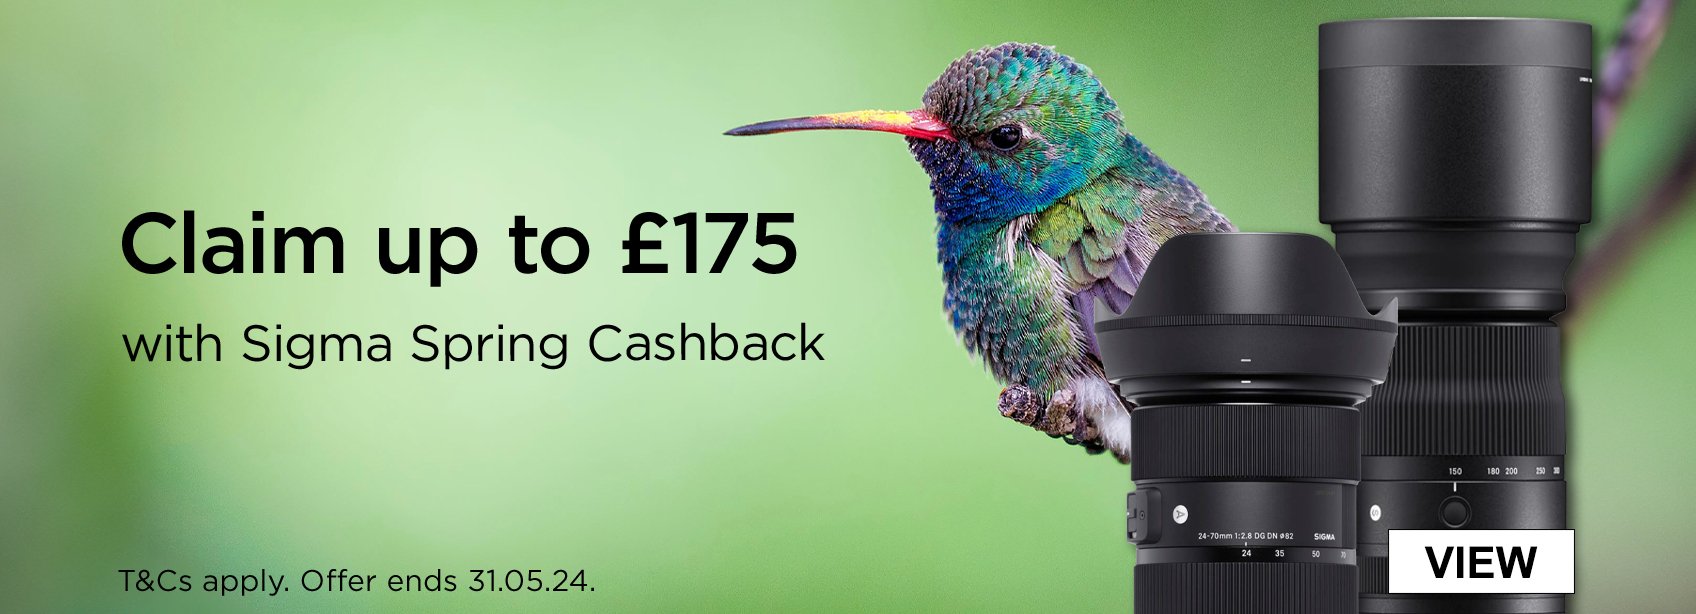 Claim up to £175 with Sigma Spring Cashback, T&Cs apply. Offer ends 31.05.24